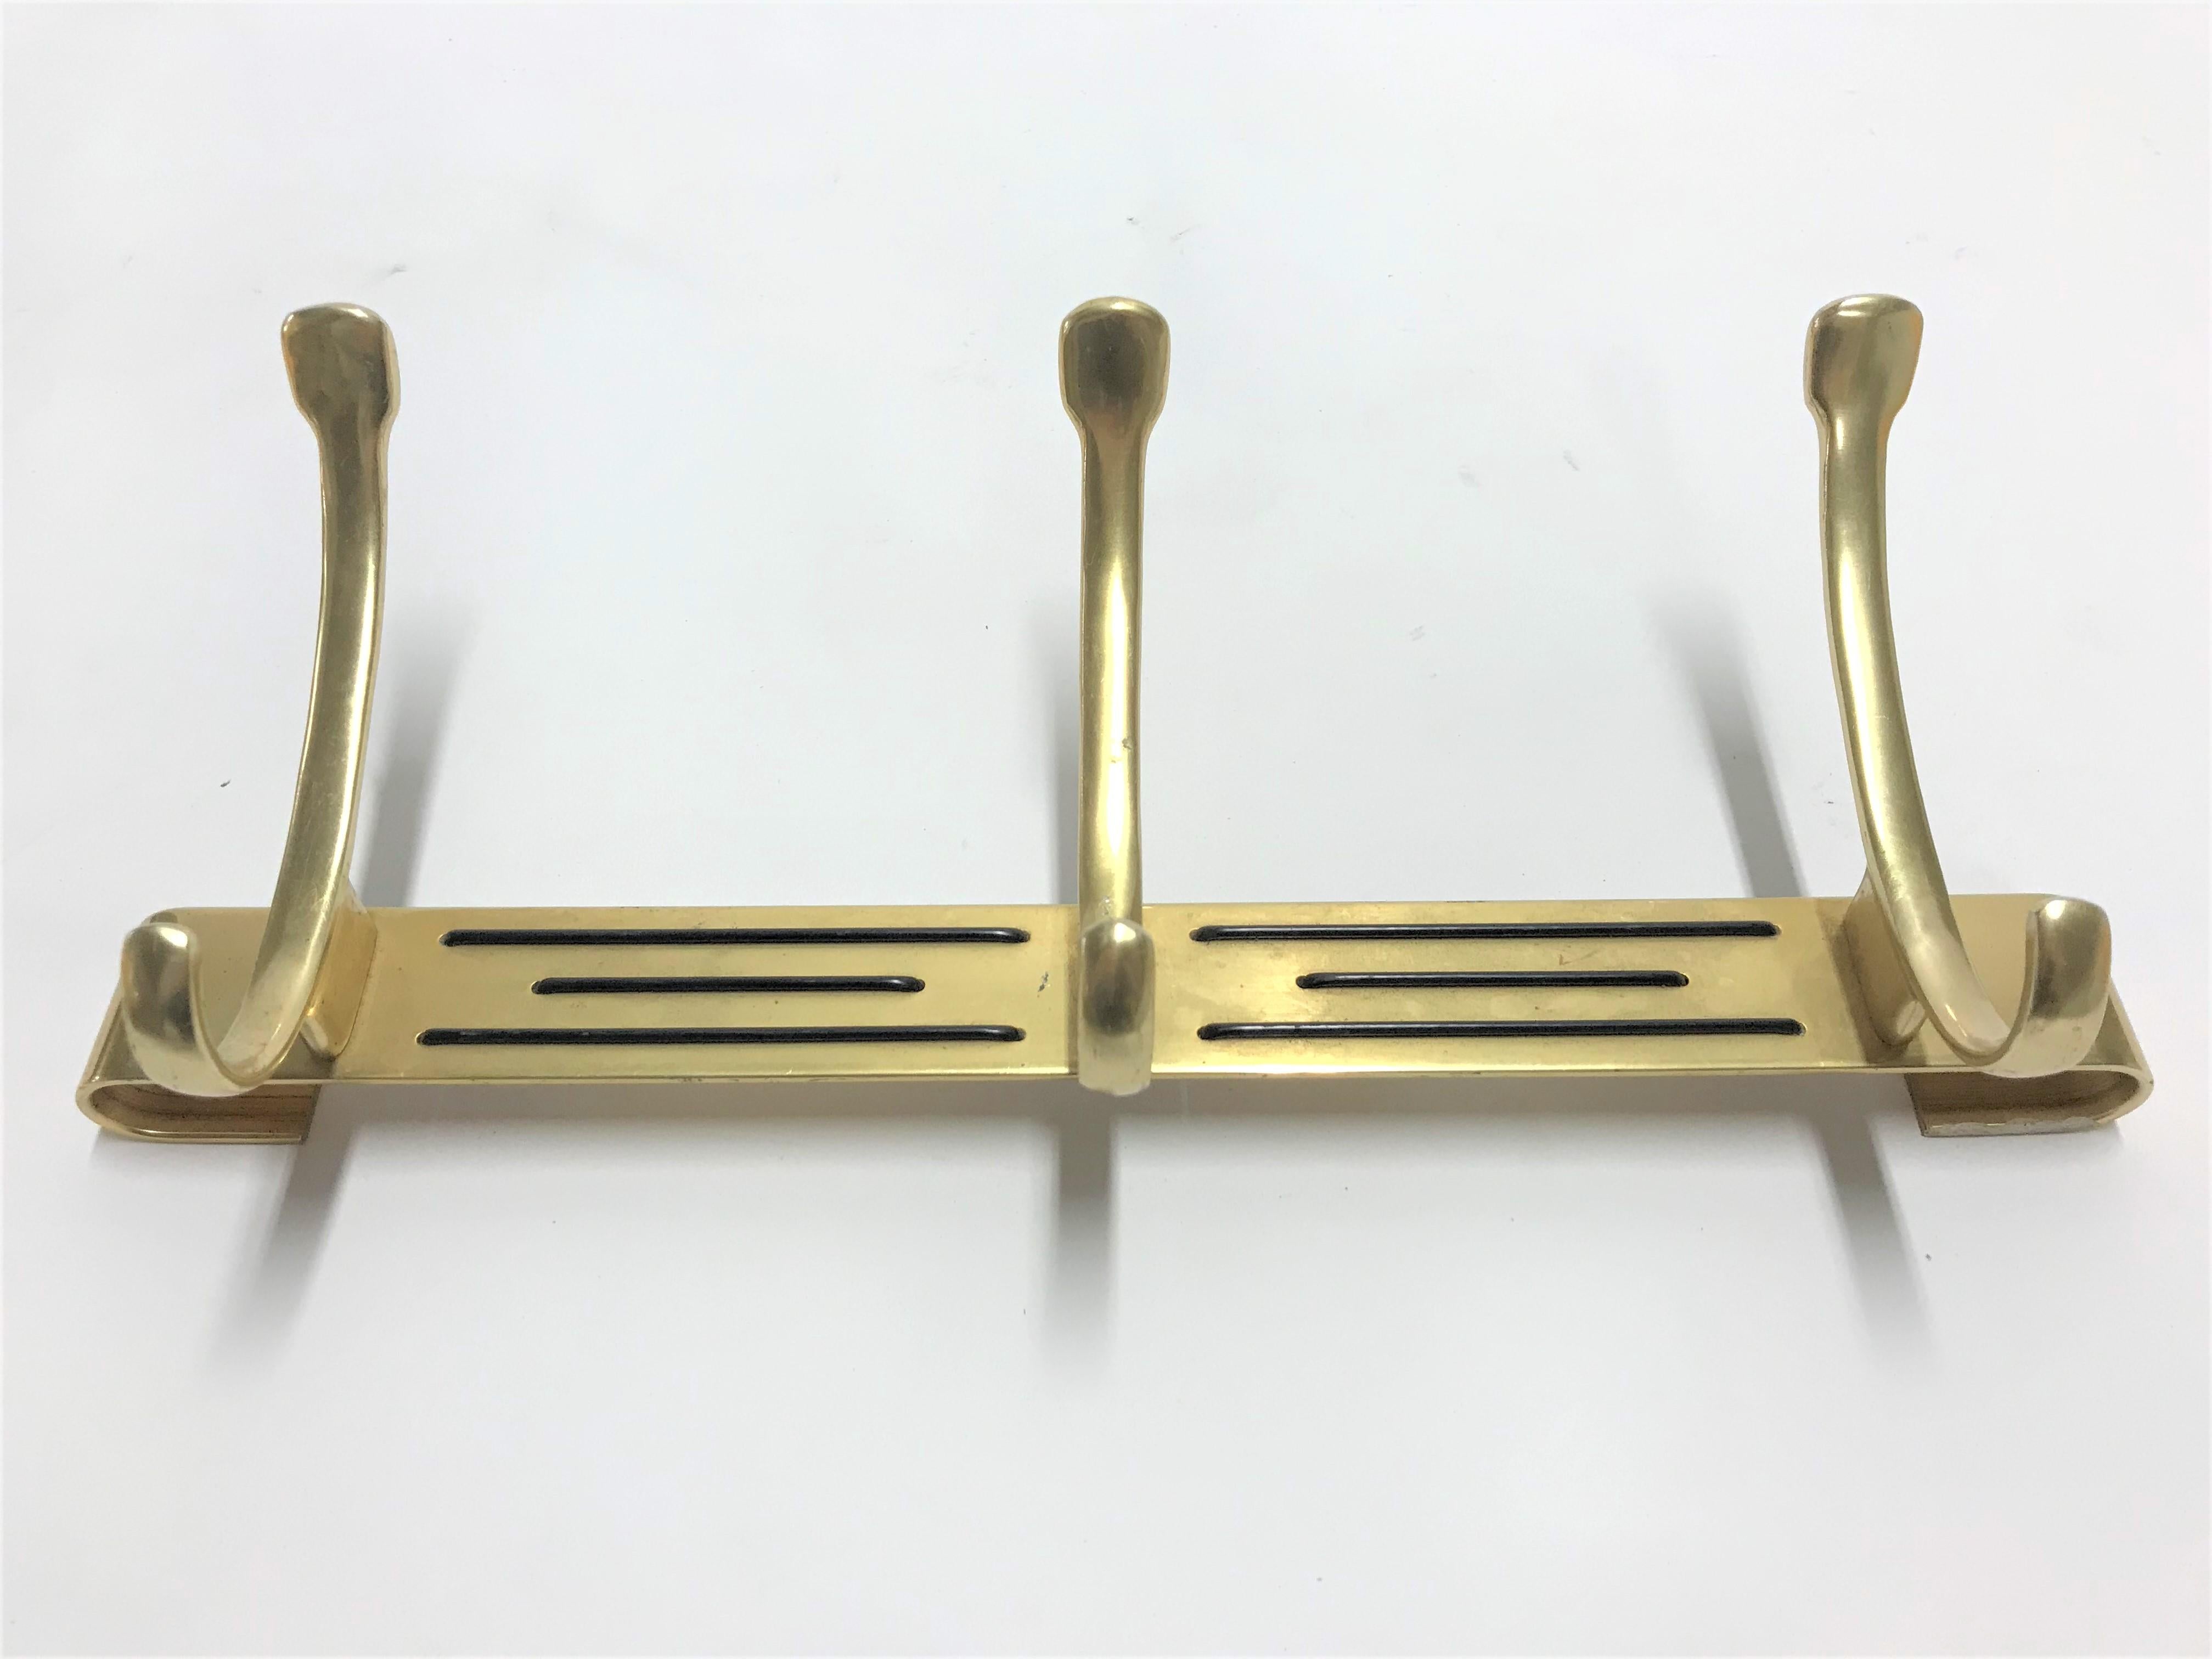 Vintage brass coat hook or coat hanger in the Hollywood Regency style.

Modern design and made of brass which has some beautiful age wear.

Good condition.

1970s, France.

Dimensions:
Height 16cm/6.5